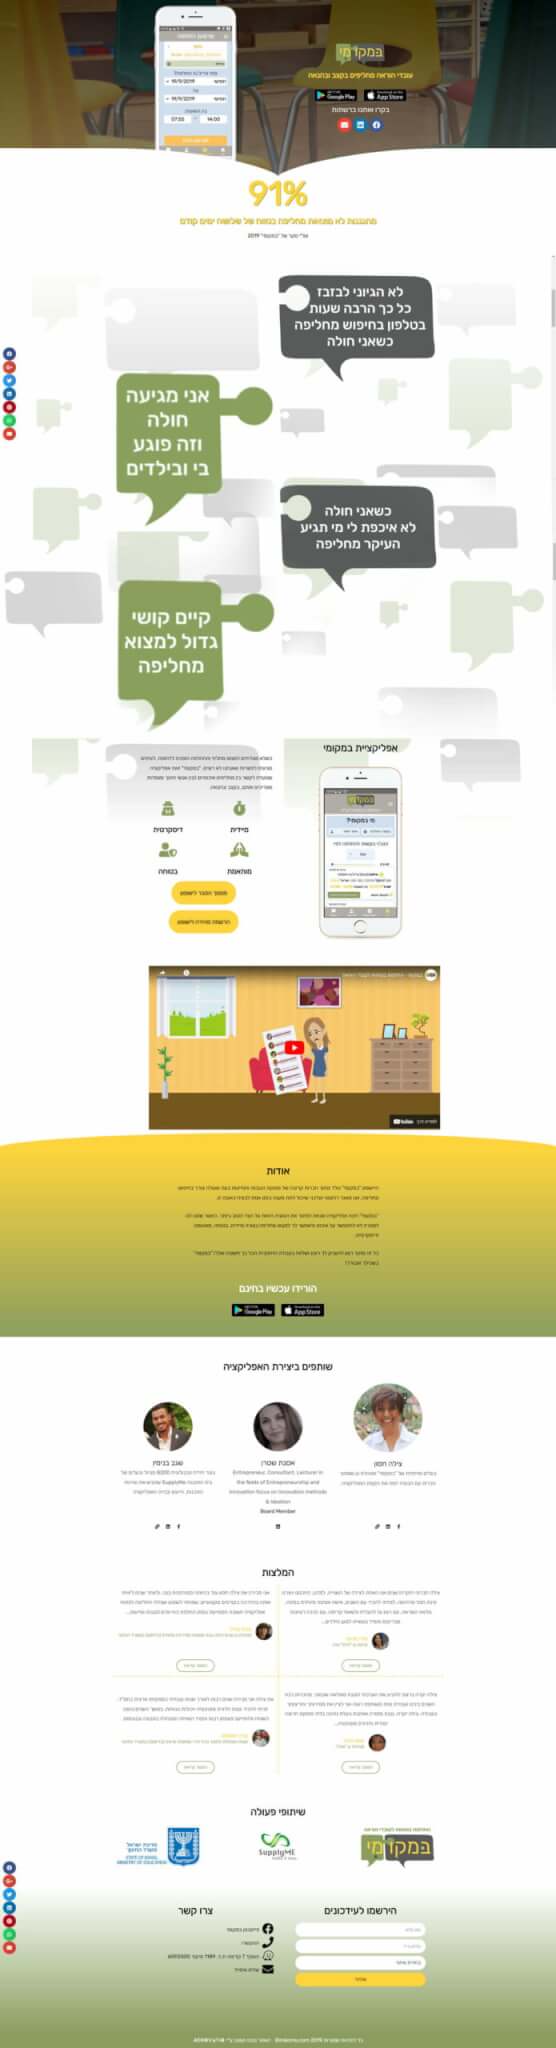 Bimkome-Landing-Page-Design-with-scroll-animations